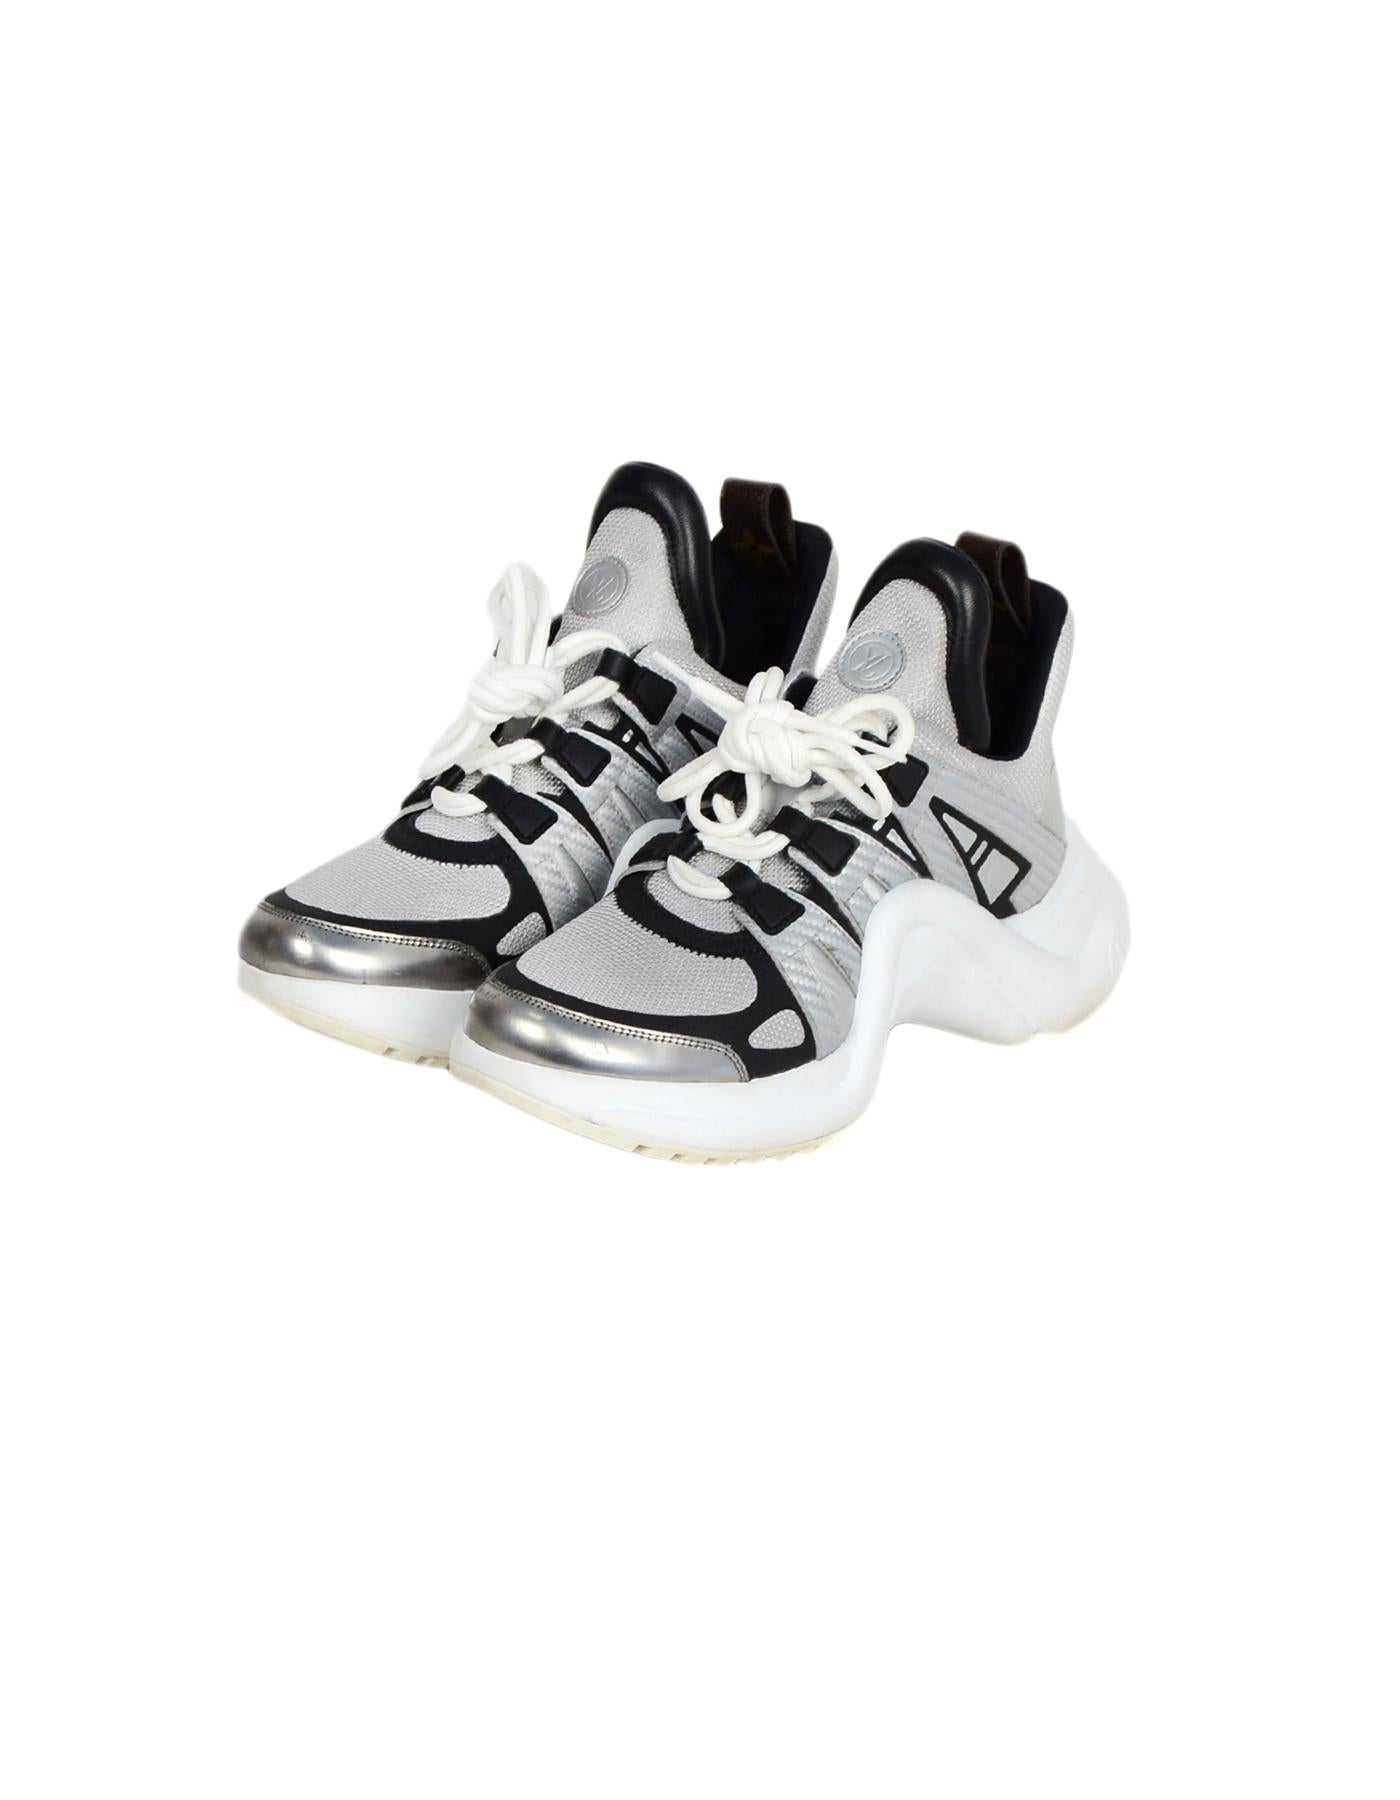 Louis Vuitton 2018 Silver/Black Archlight Reflective Sneakers sz 39 rt $1, 500 In Good Condition In New York, NY